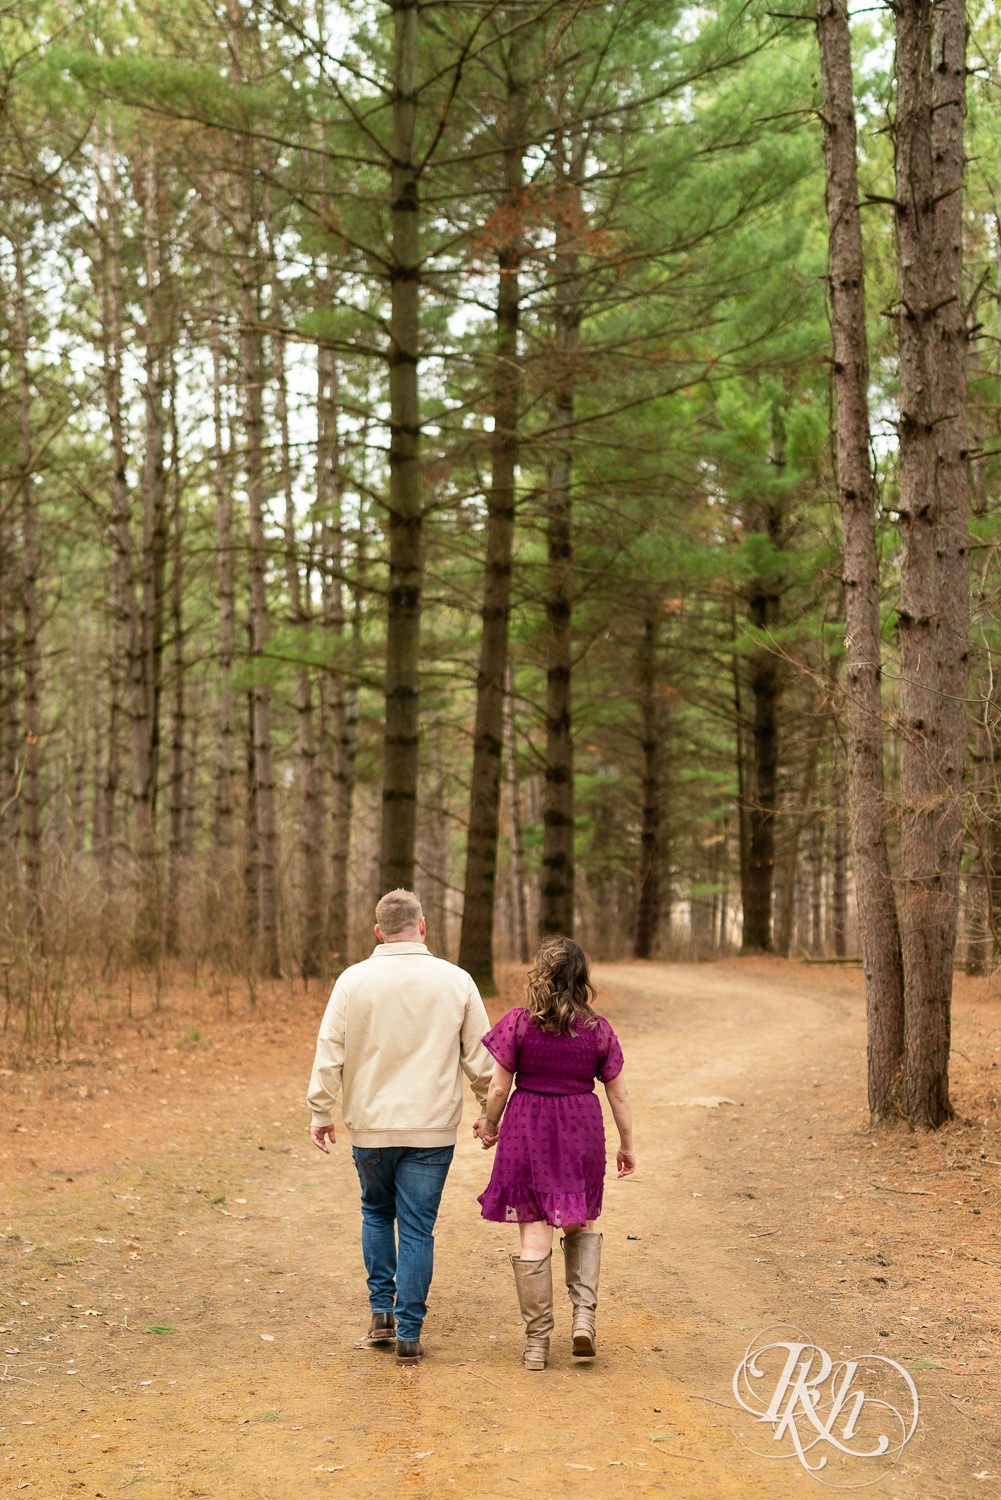 Man in jeans and woman in magenta dress walk through the woods in Lebanon Hills in Eagan, Minnesota.